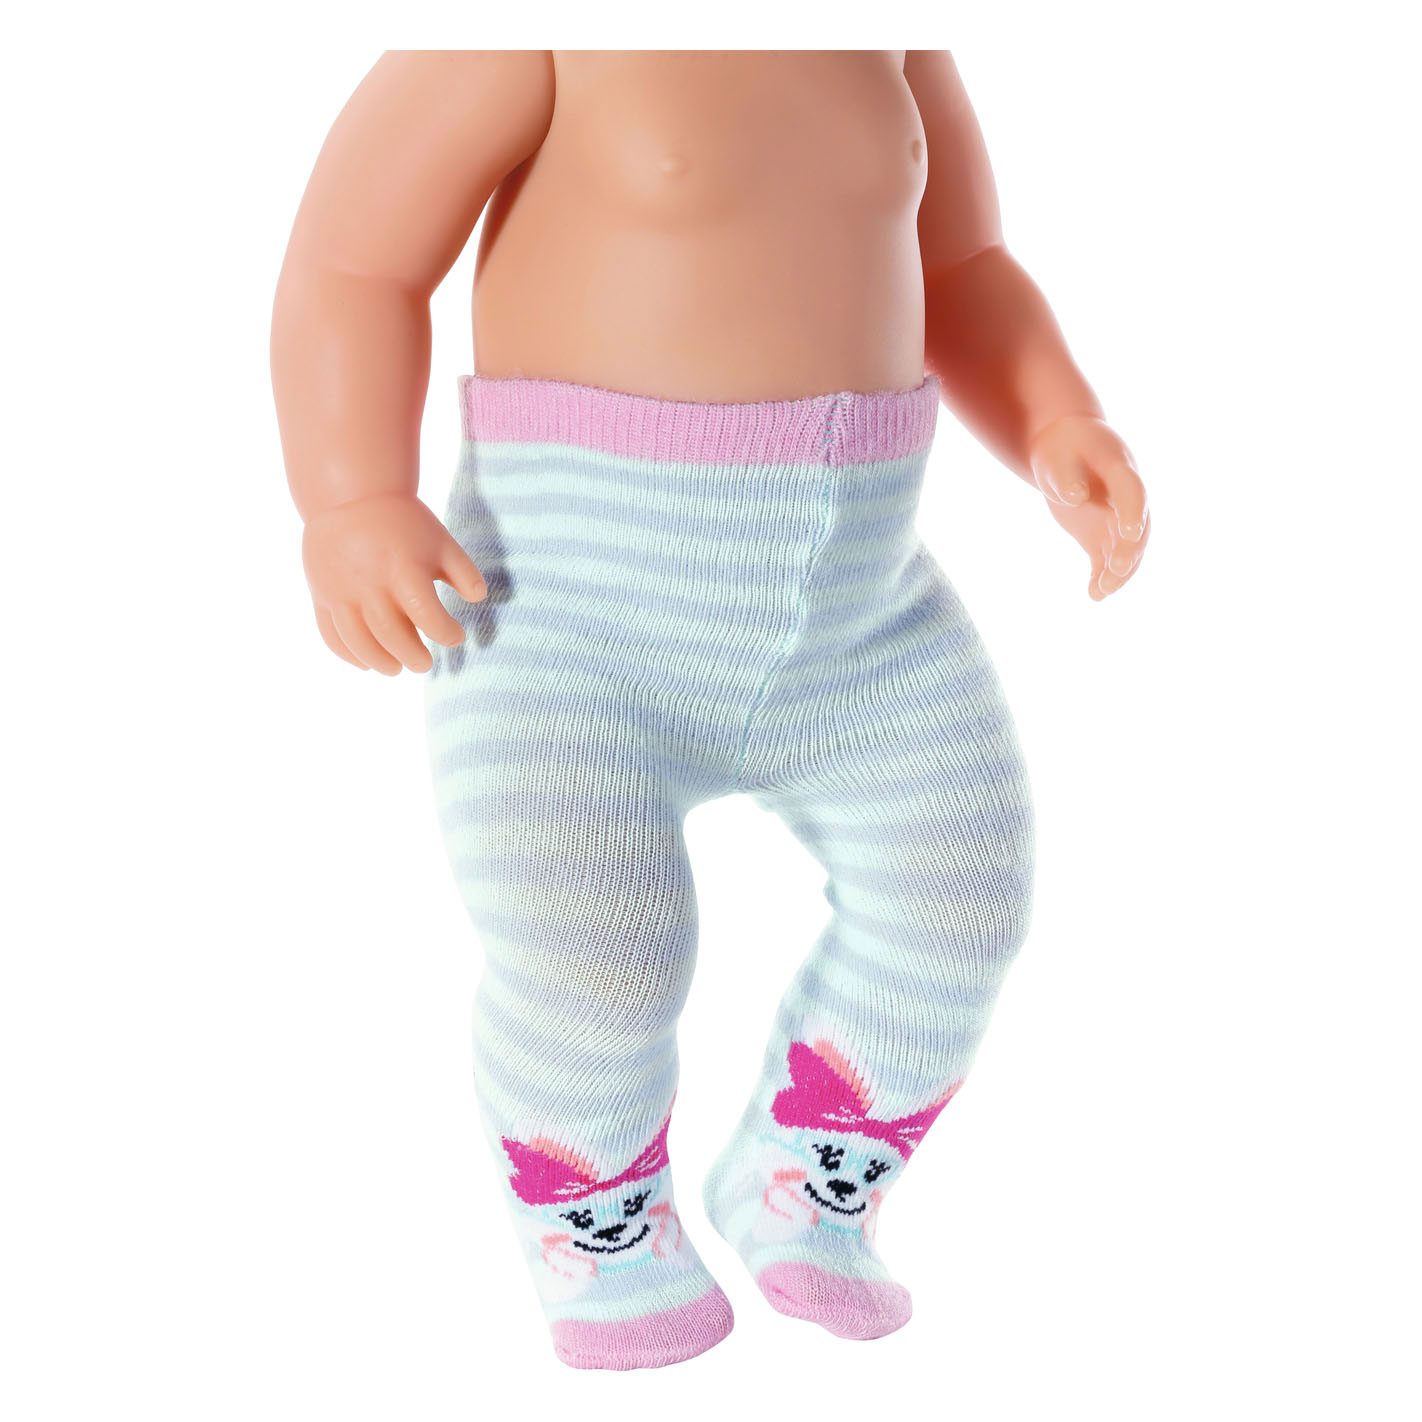 BABY born Maillots 2st., 43cm